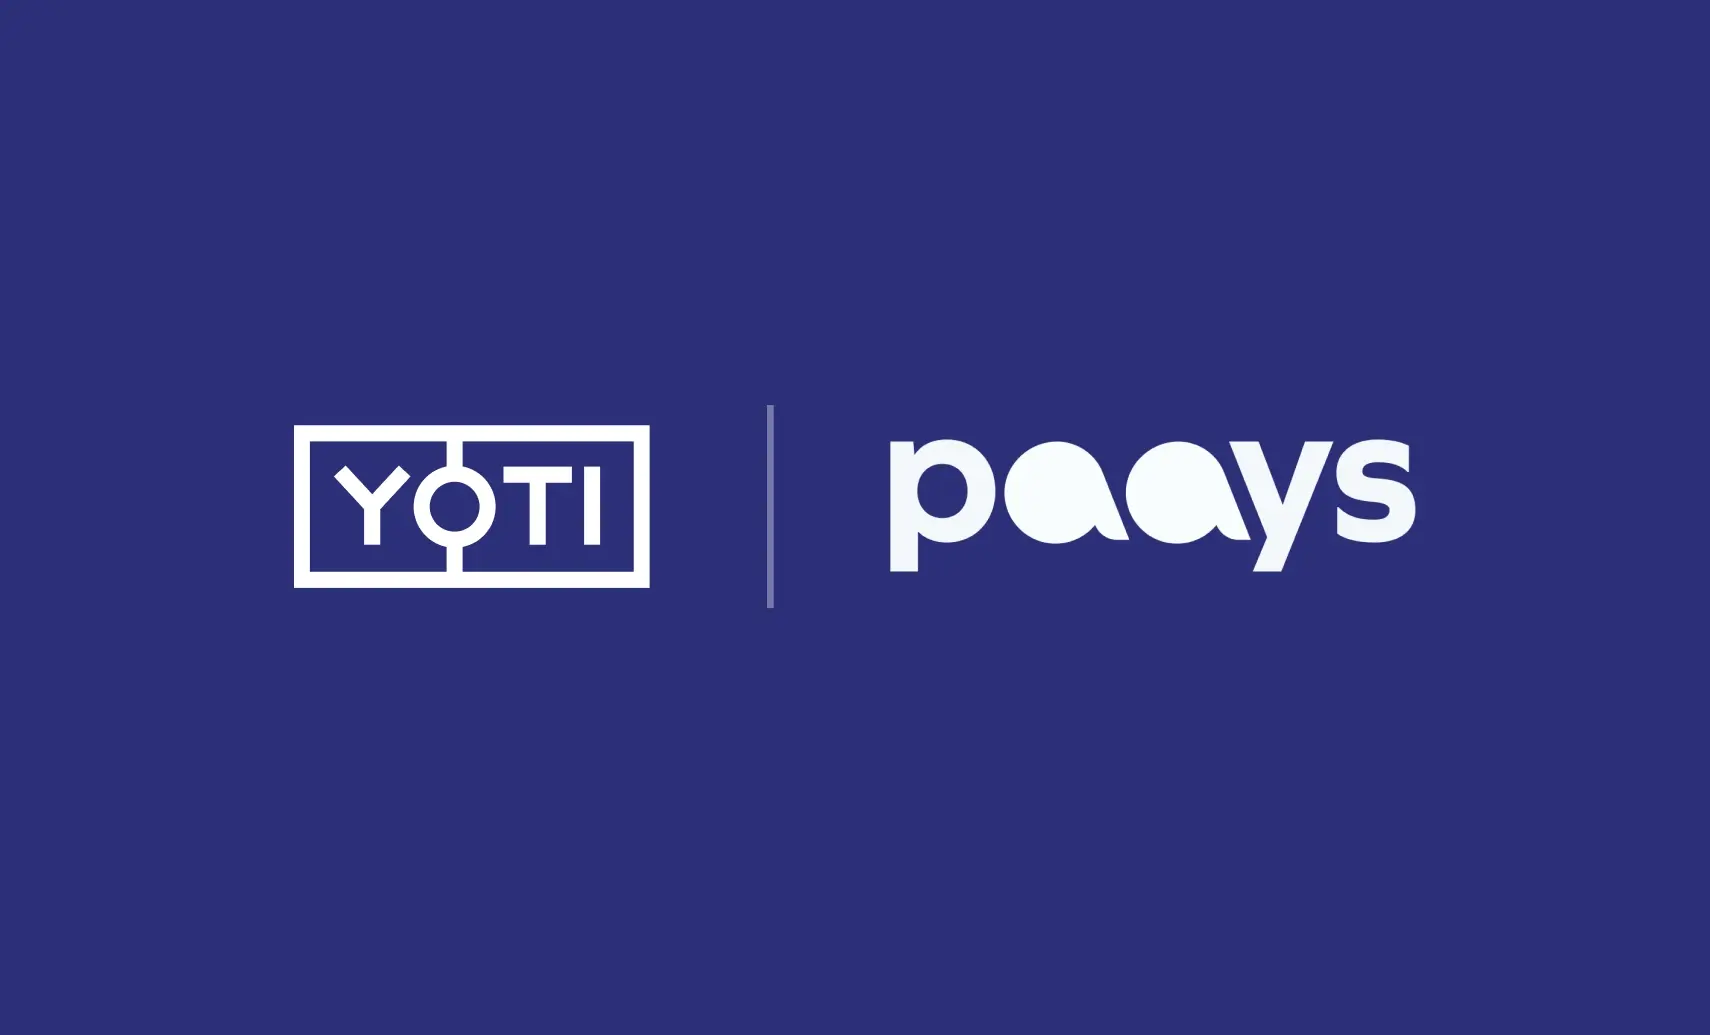 Yoti and Paays logos presented together